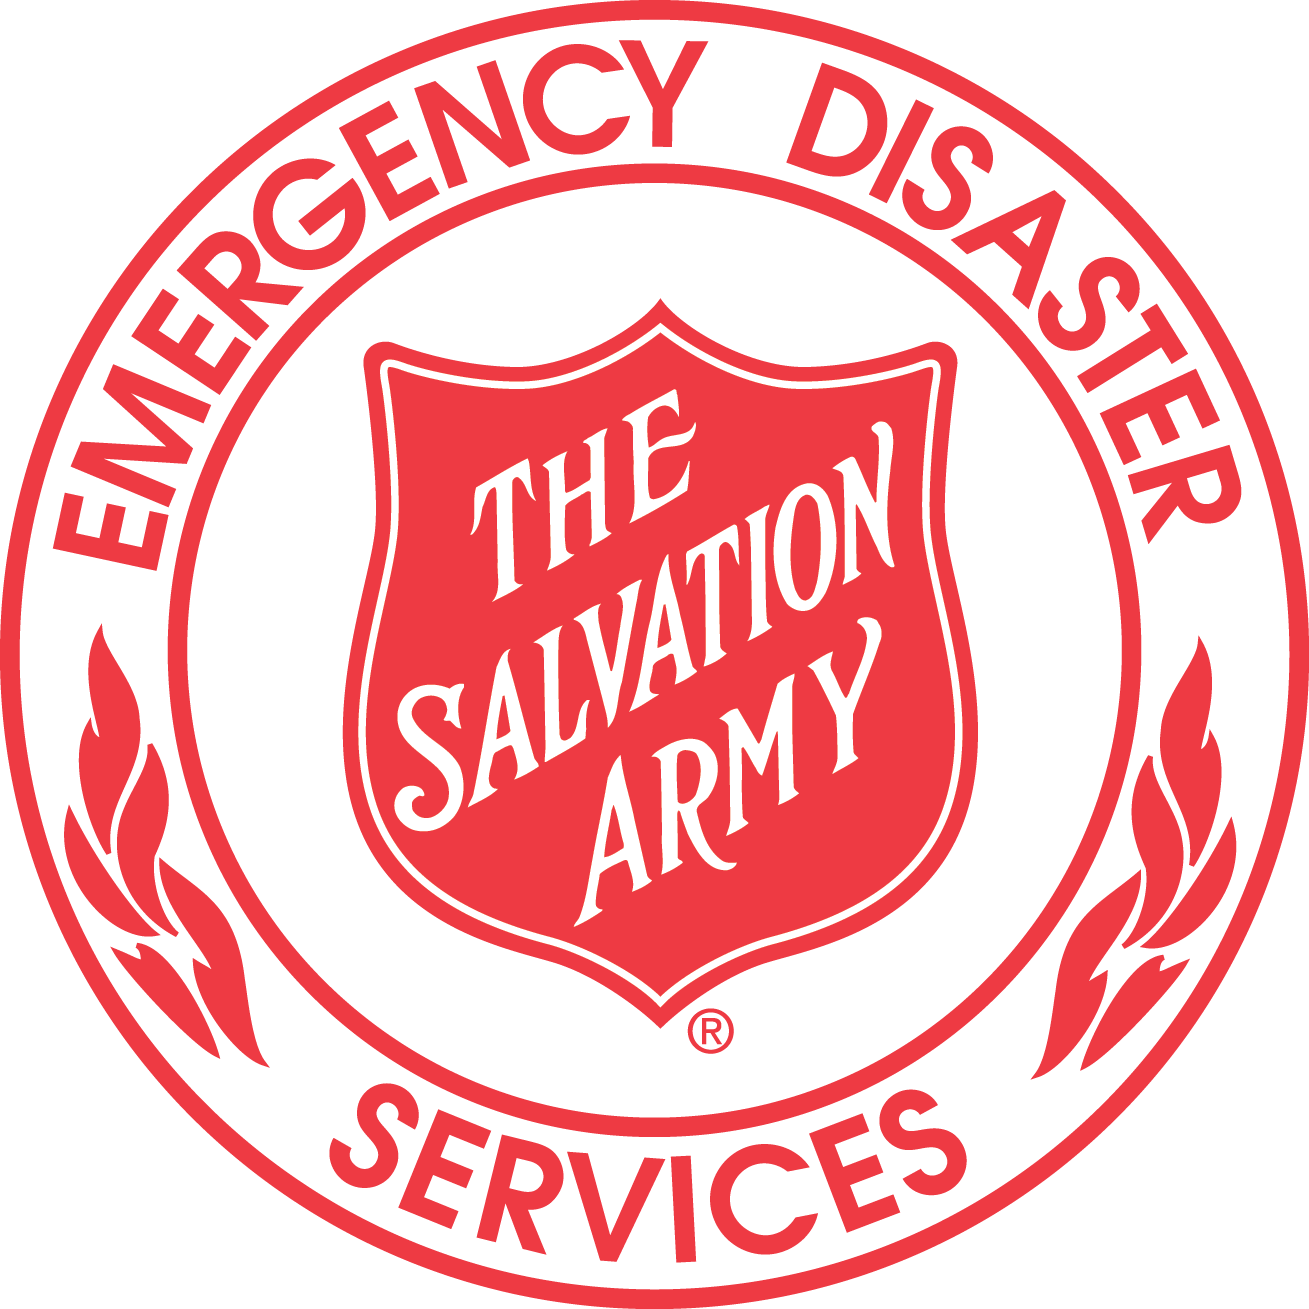 Emergency Disaster Services - Salvation Army Emergency Disaster Services (1309x1309)